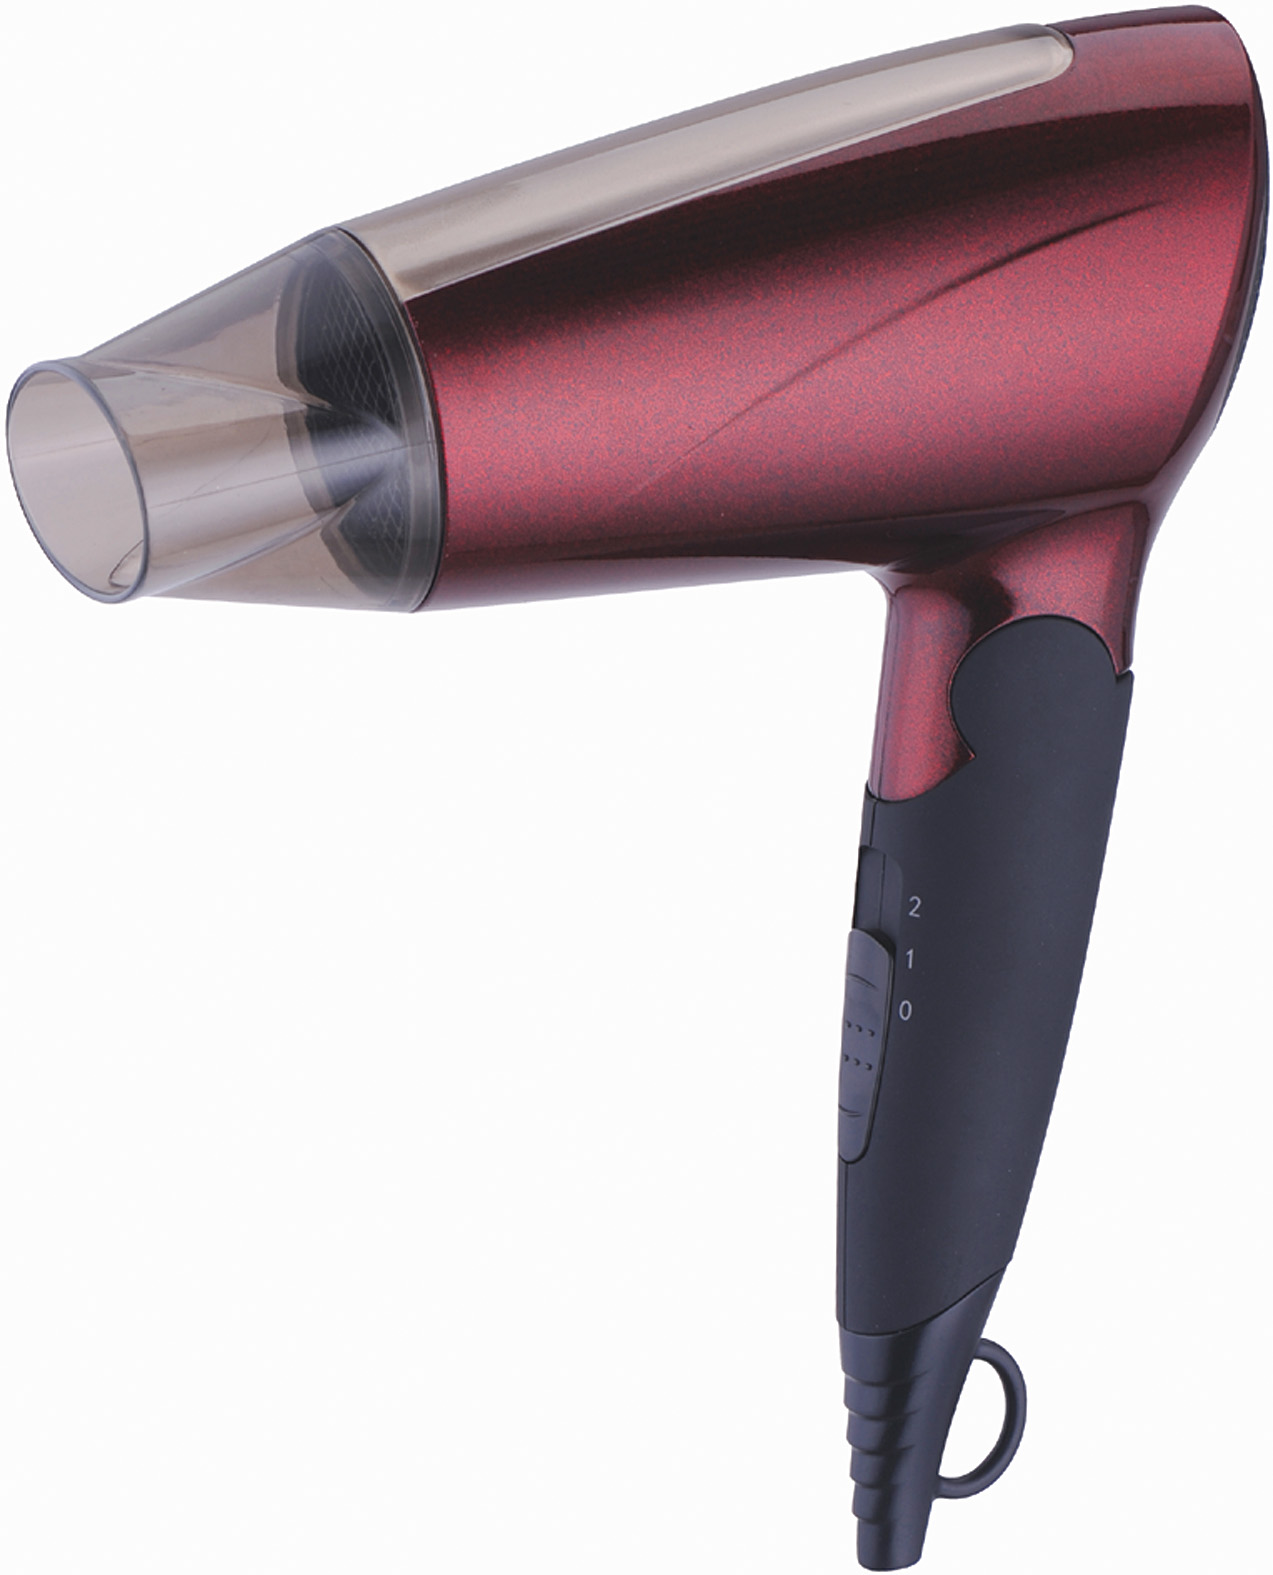 1200w Hotel/Travel Foldable Lonic Hair Dry... Made in Korea